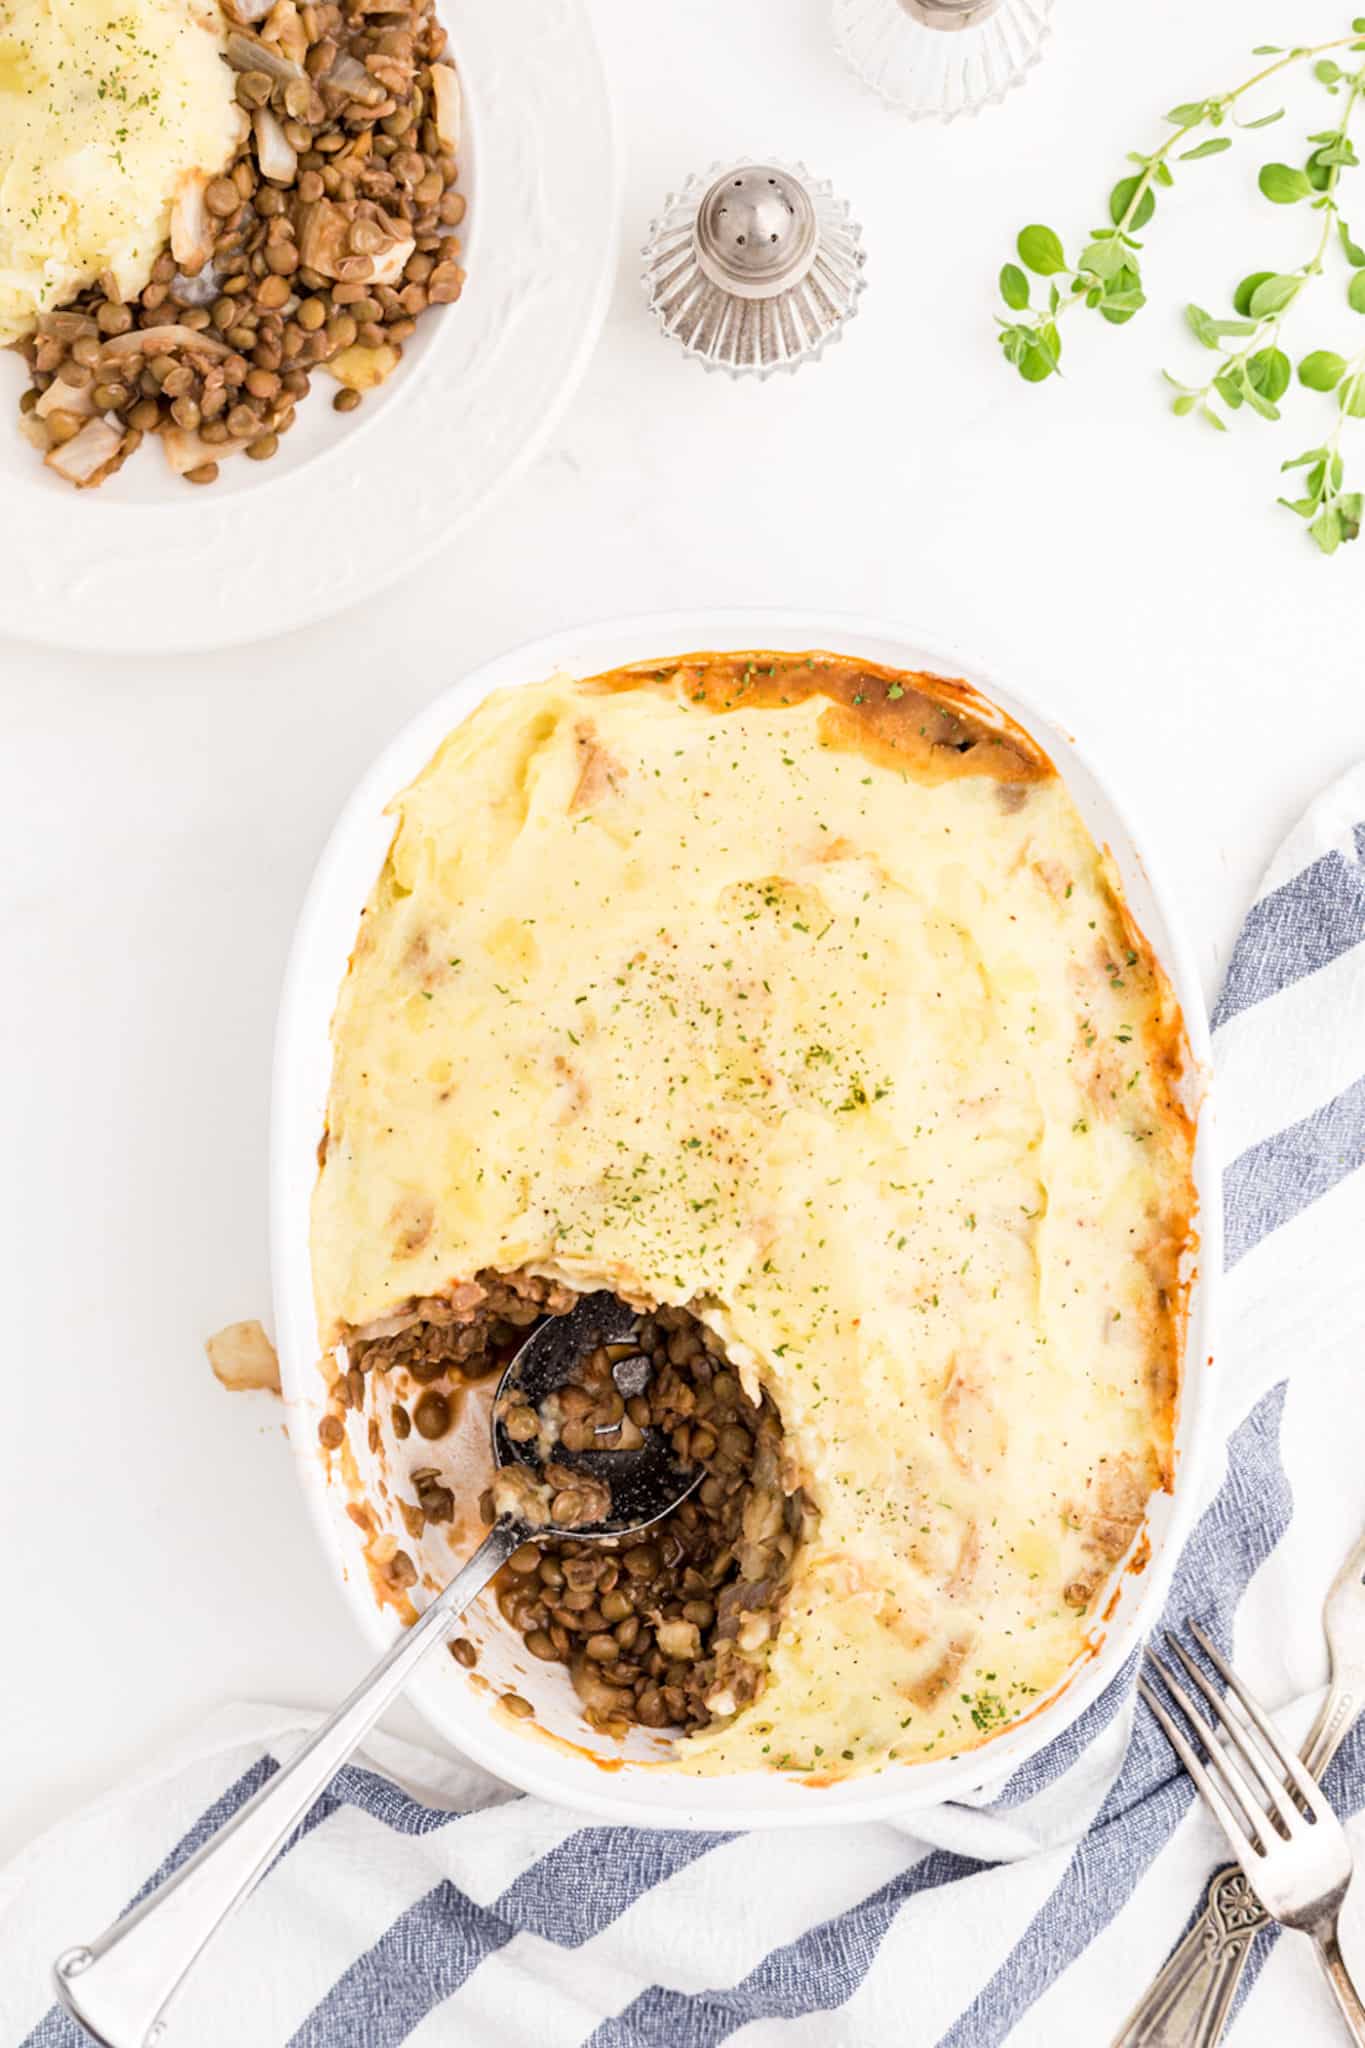 cooked shepherd's pie with lentils on a tabletop